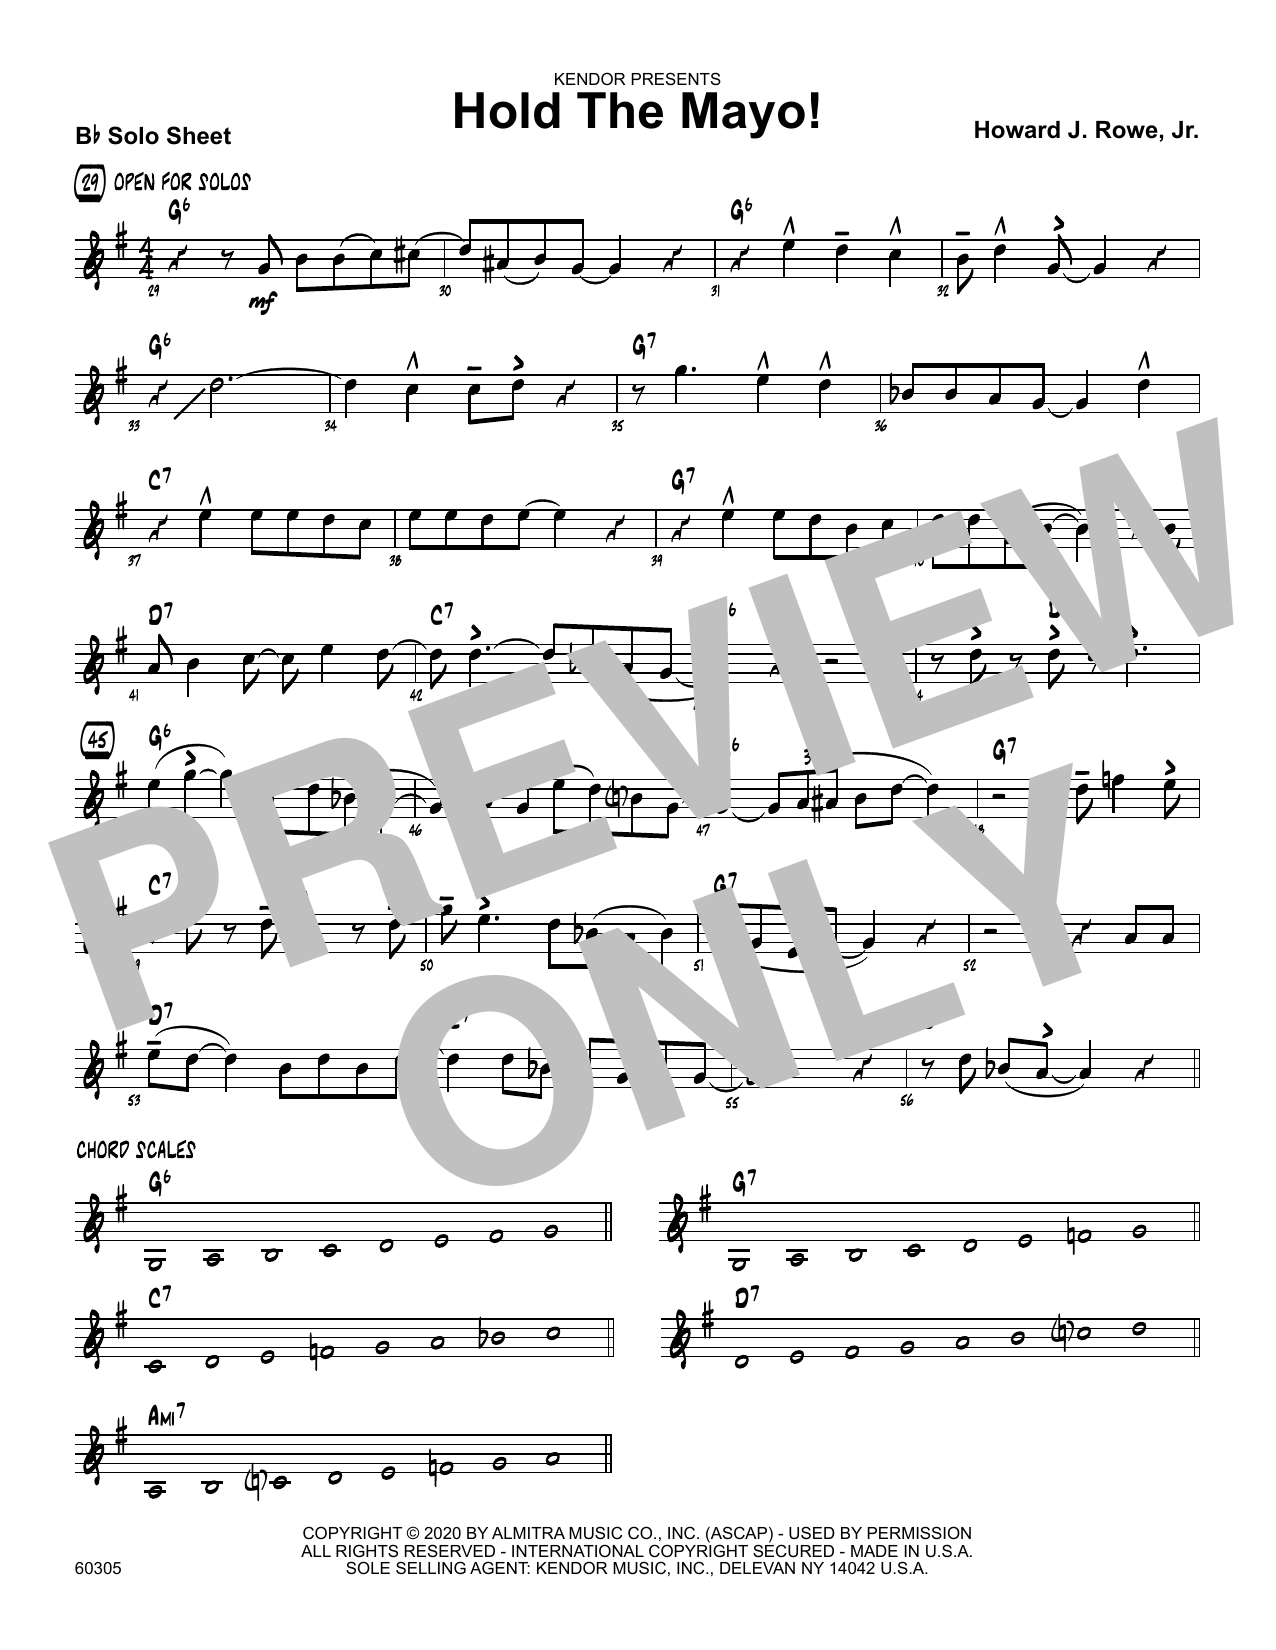 Download Howard Rowe Hold The Mayo! - Solo Sheet - Alto Sax Sheet Music